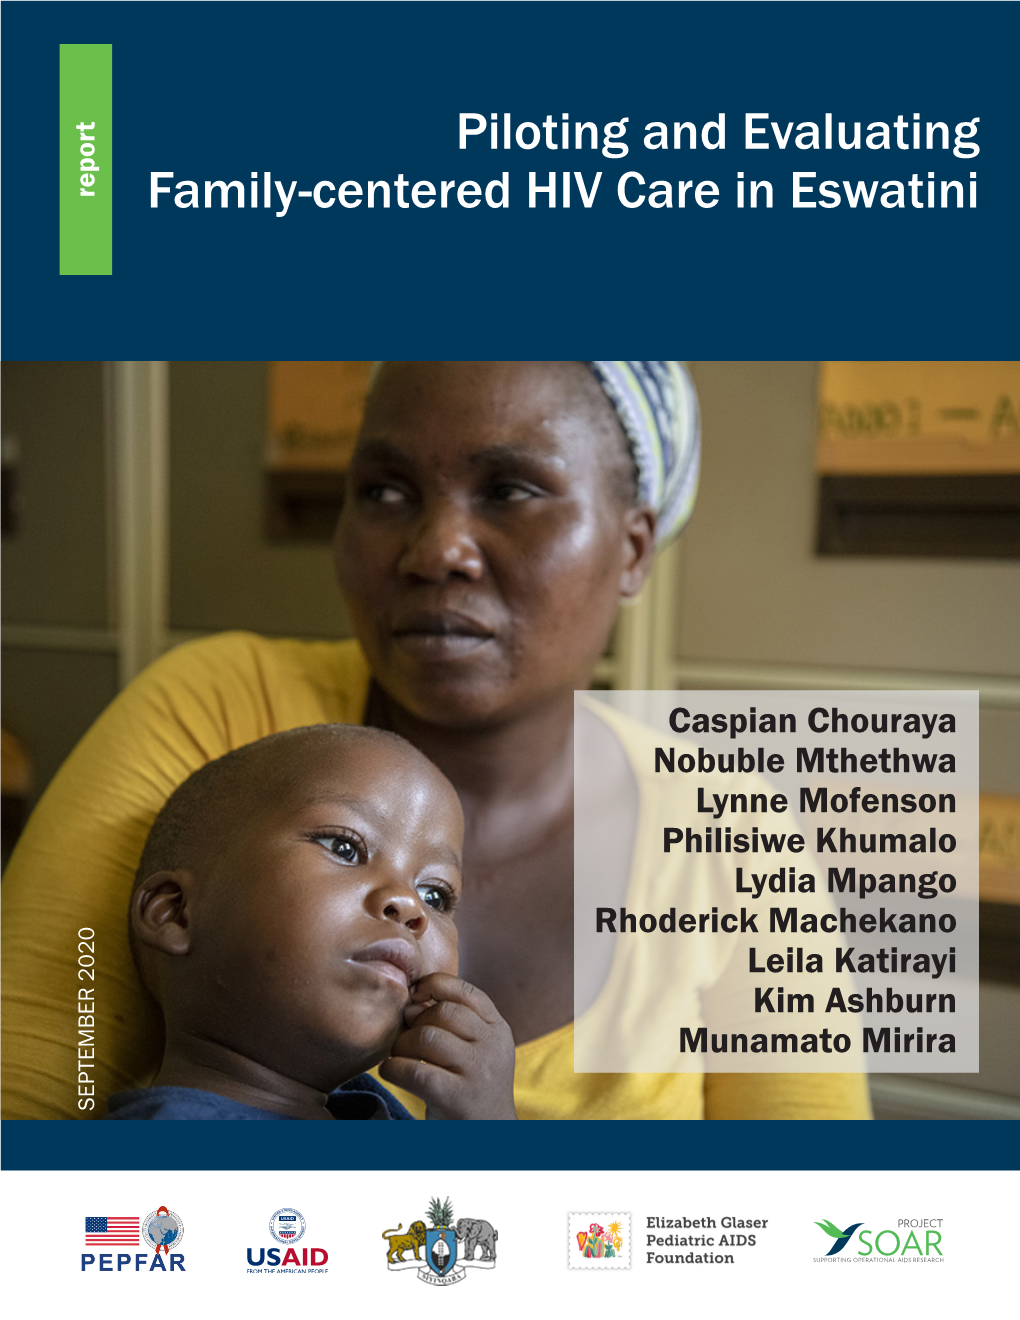 Piloting and Evaluating Family-Centered HIV Care in Eswatini